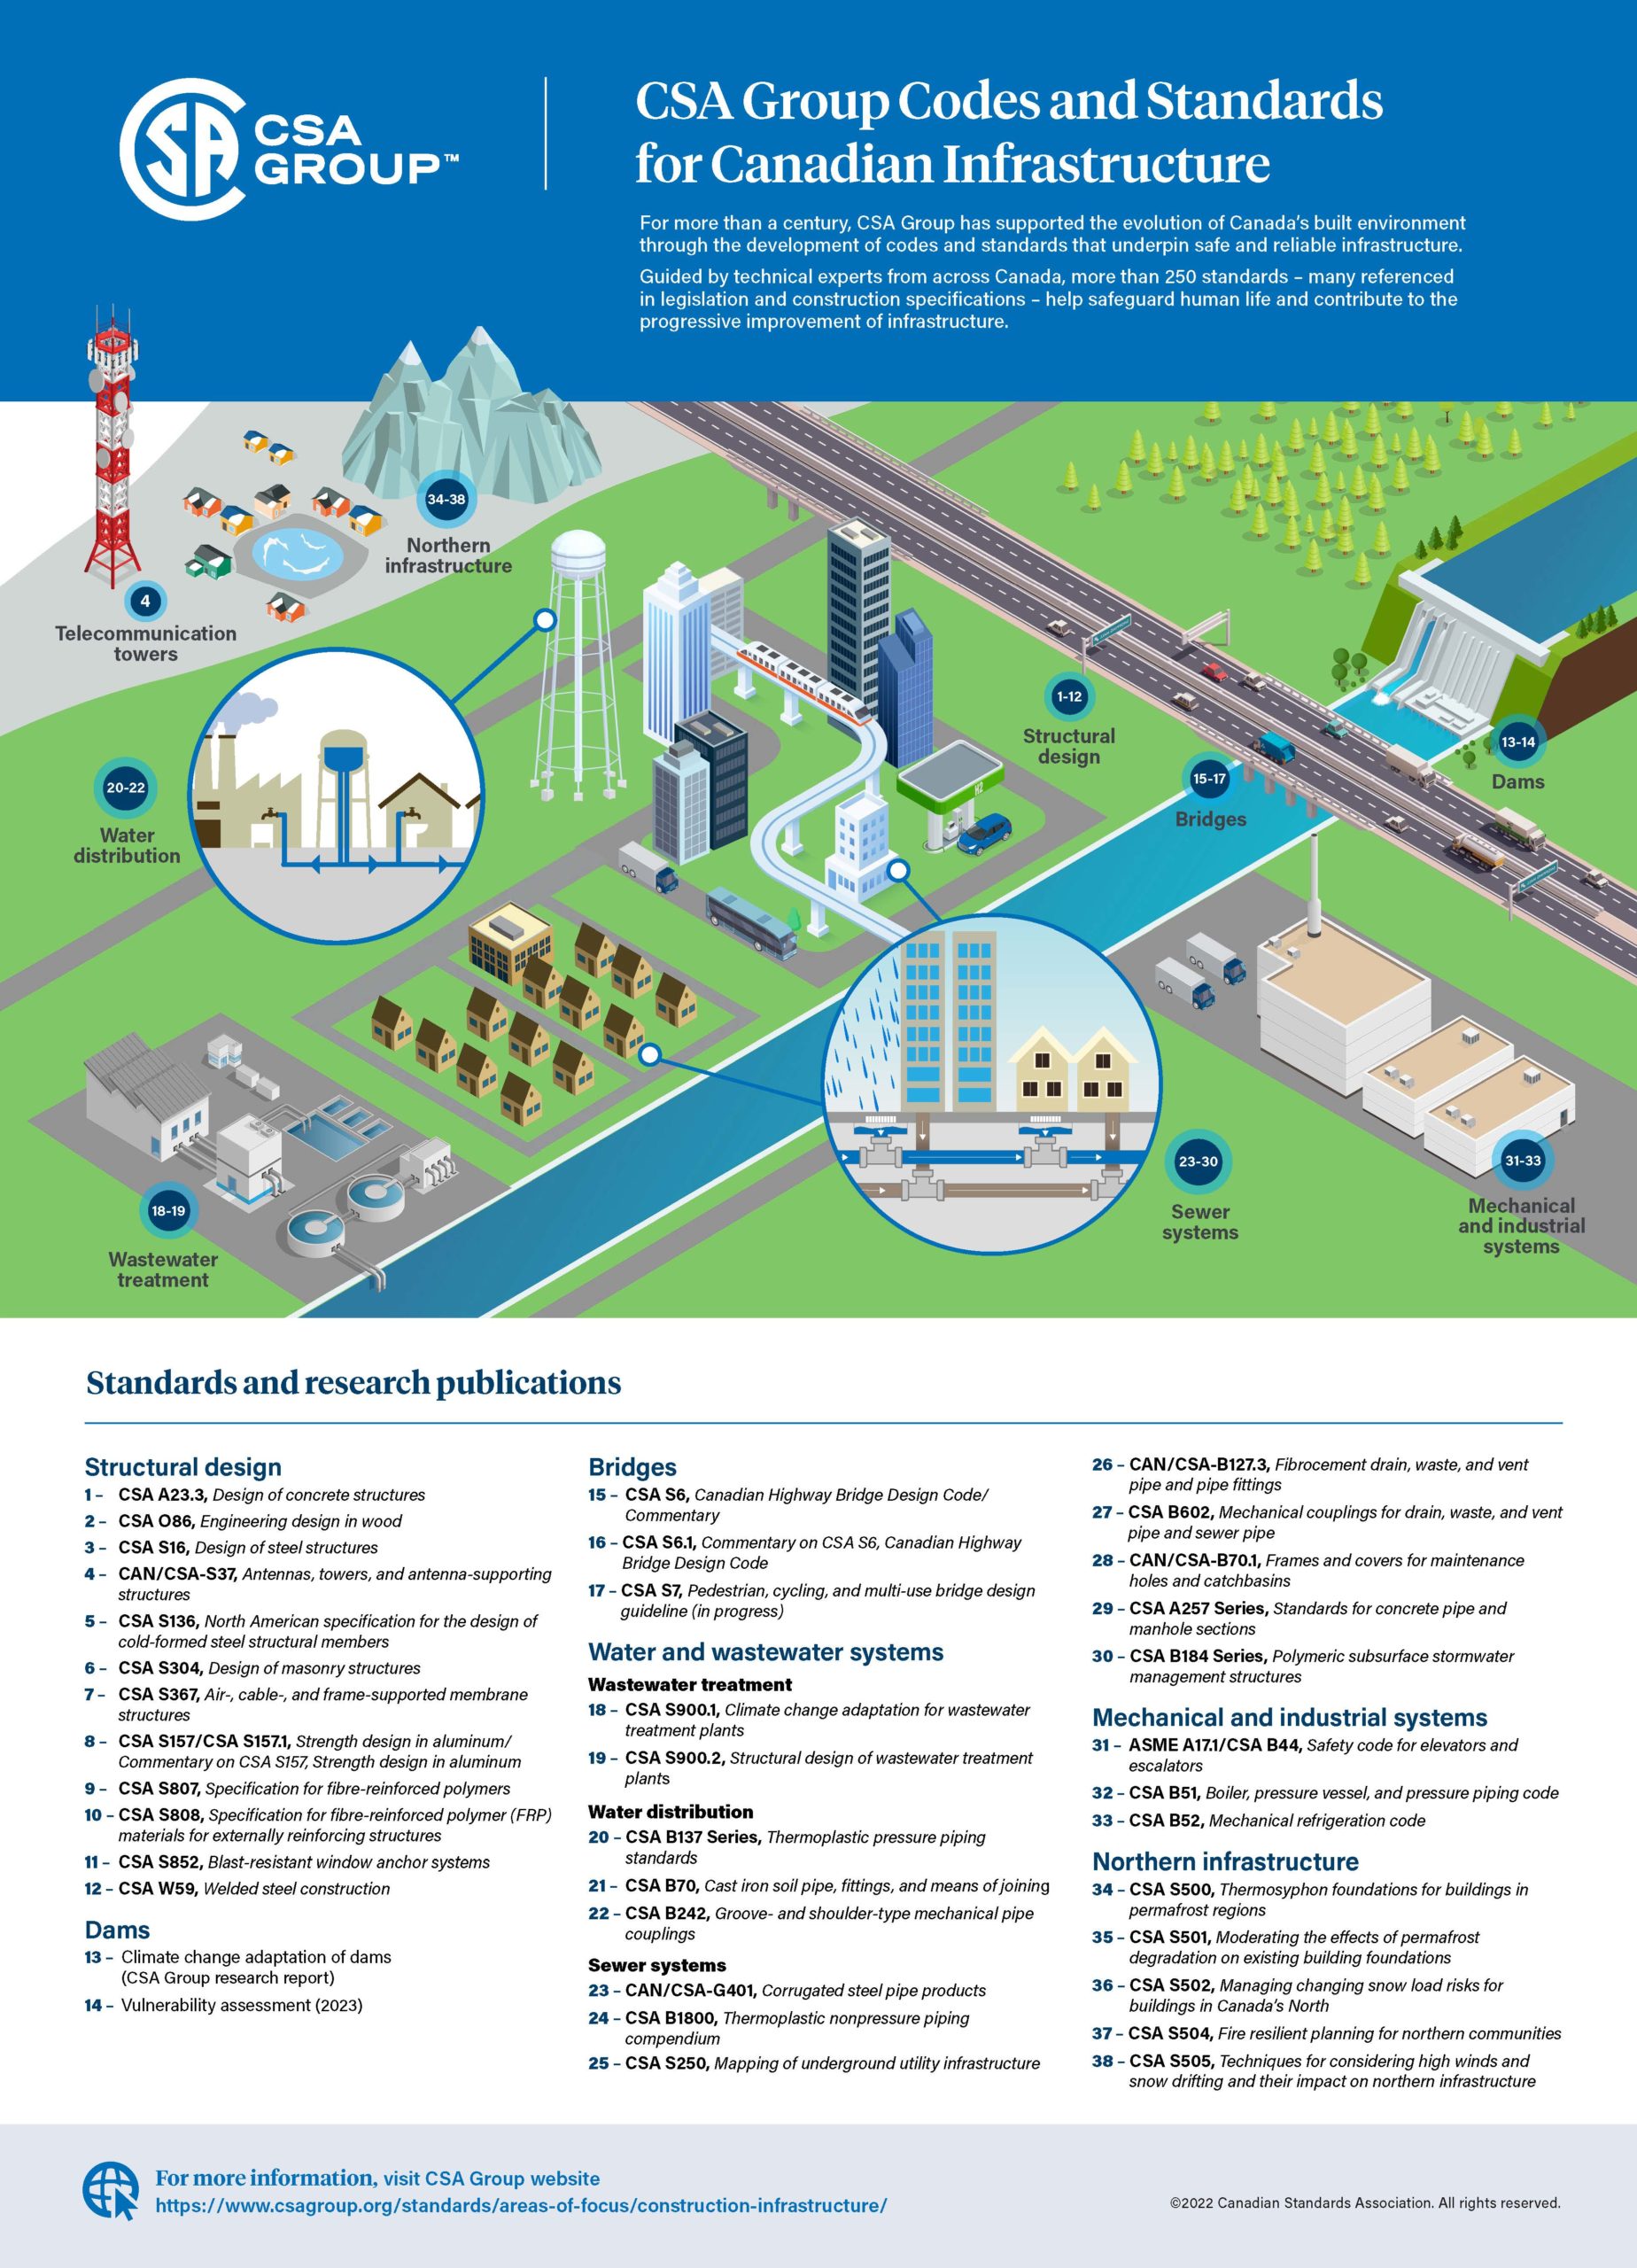 Featured Image. CSA Group Codes and Standards for infrastructure infographic